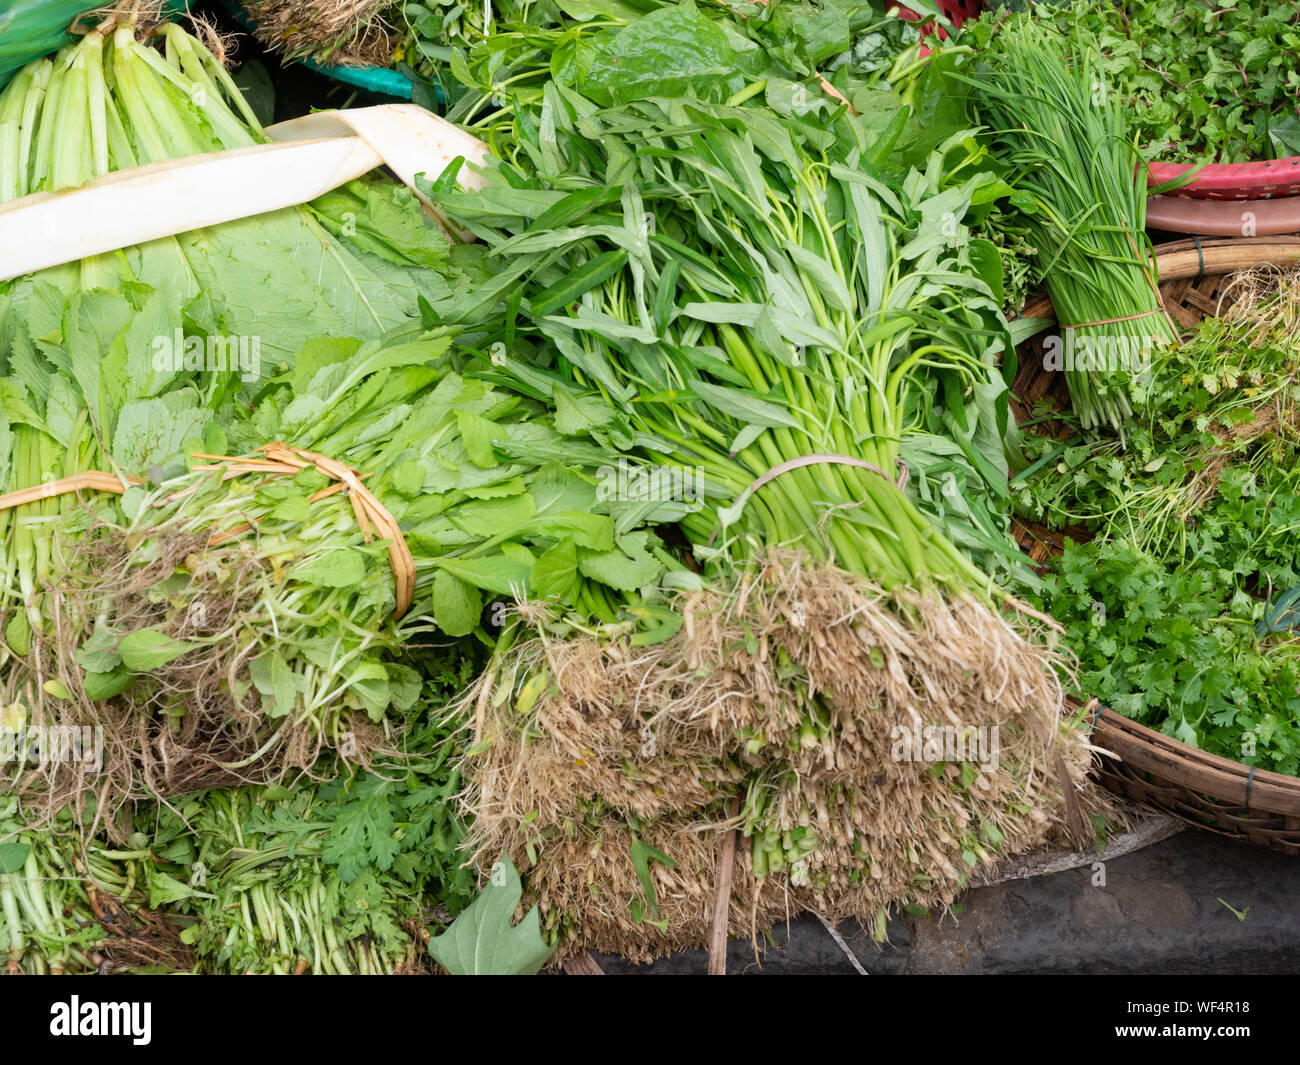 Water spinach, cilantro, lemon grass, and other leafy green vegetables at an outdoor market in Vietnam. Stock Photo